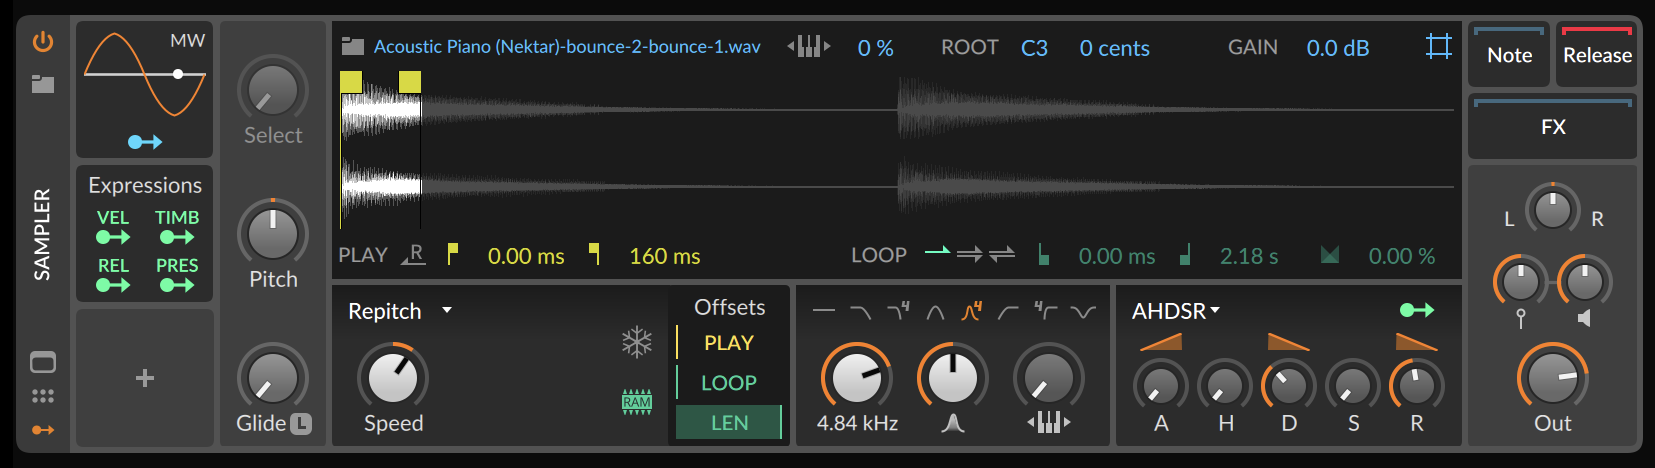 Bitwig Sampler instrument showing the clip and AHDSR settings